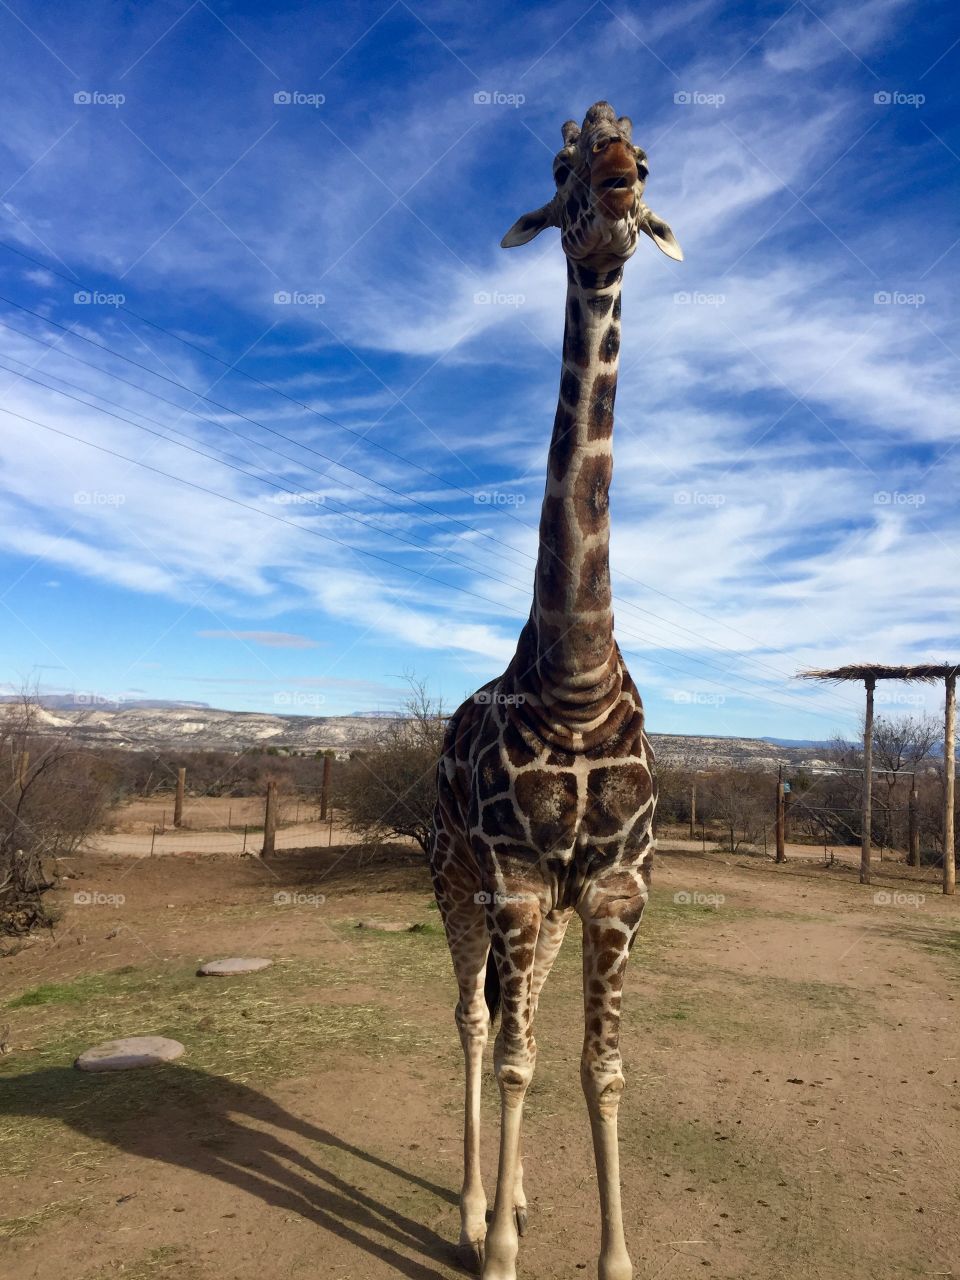 A giraffe elongating his neck to take a peak at the top on the truck
